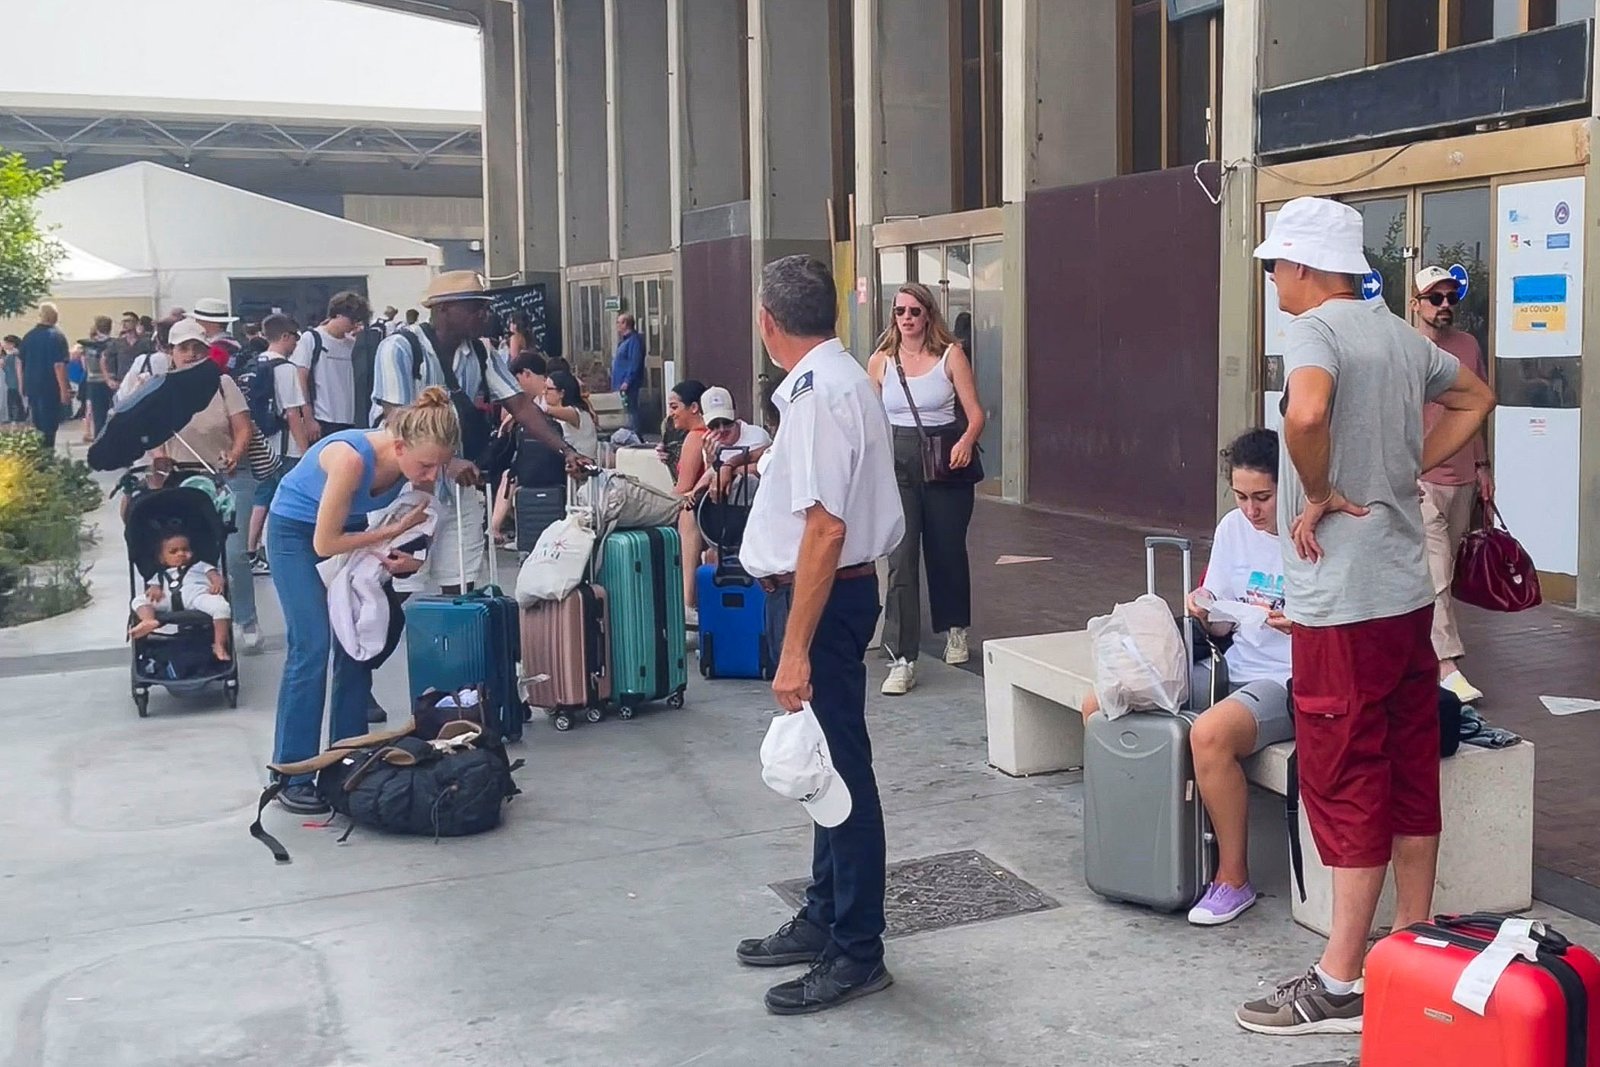 sicily-airport-chaos-puts-italy’s-tourism-ambitions-to-the-test